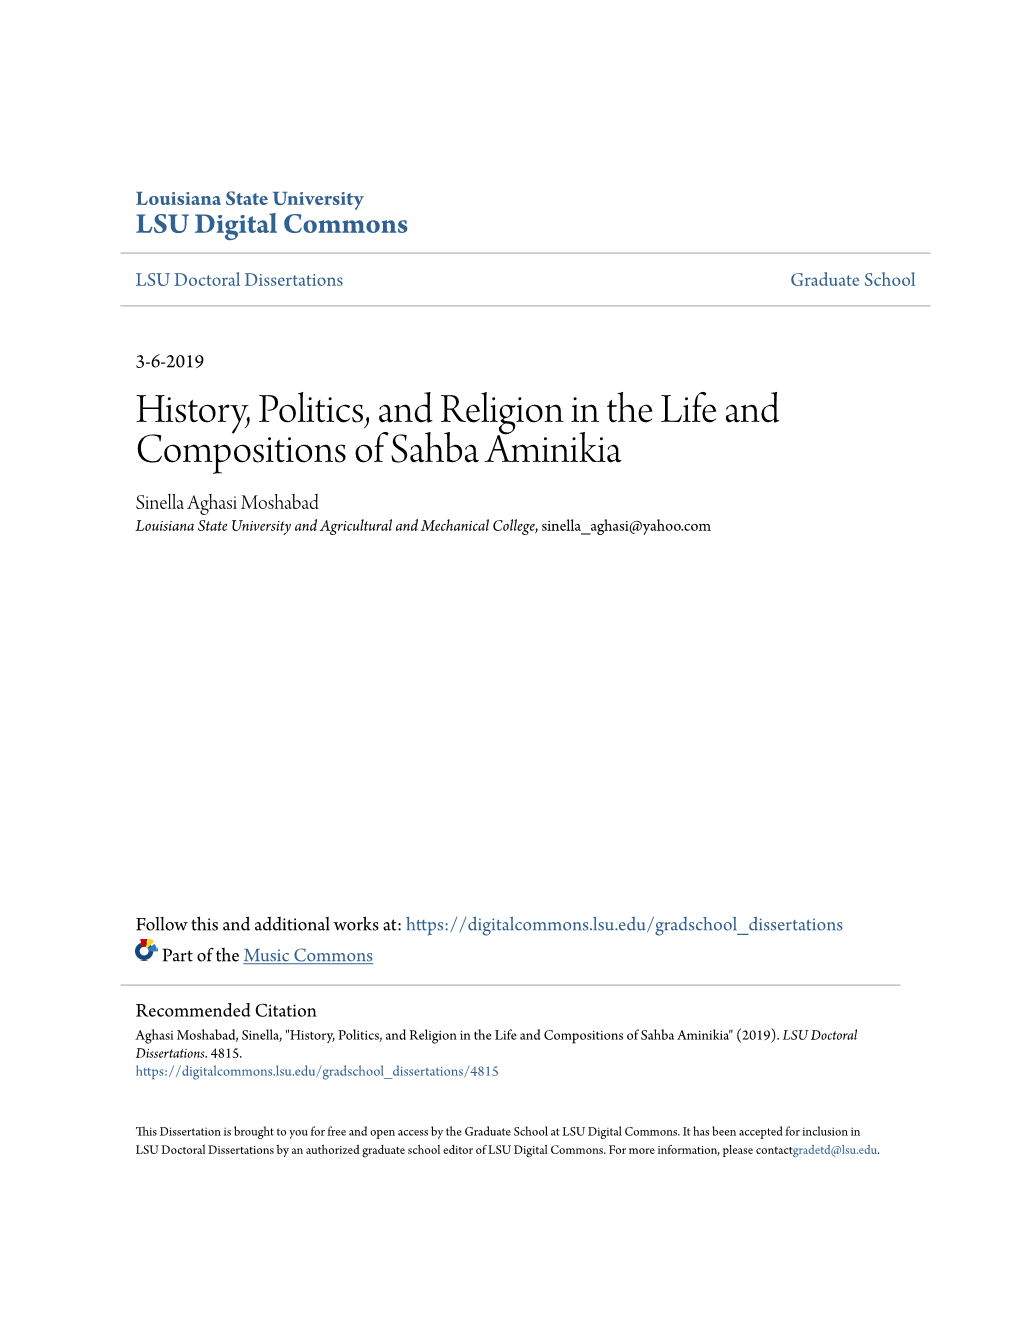 History, Politics, and Religion in the Life and Compositions of Sahba